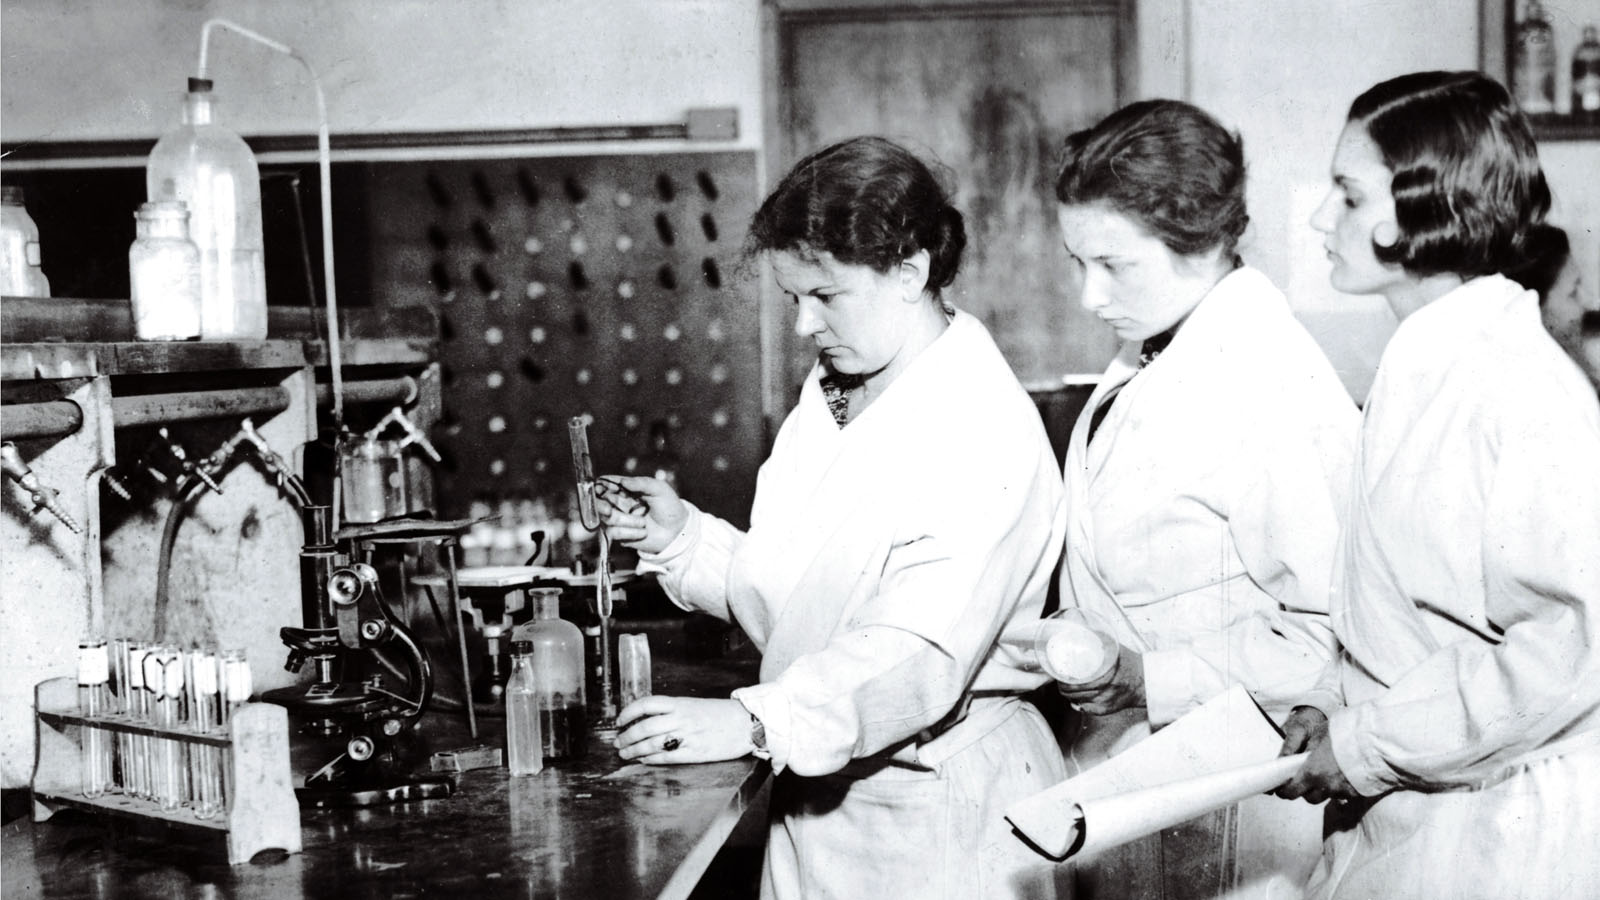 Female medical students looking at instruments in an old PCOM laboratory